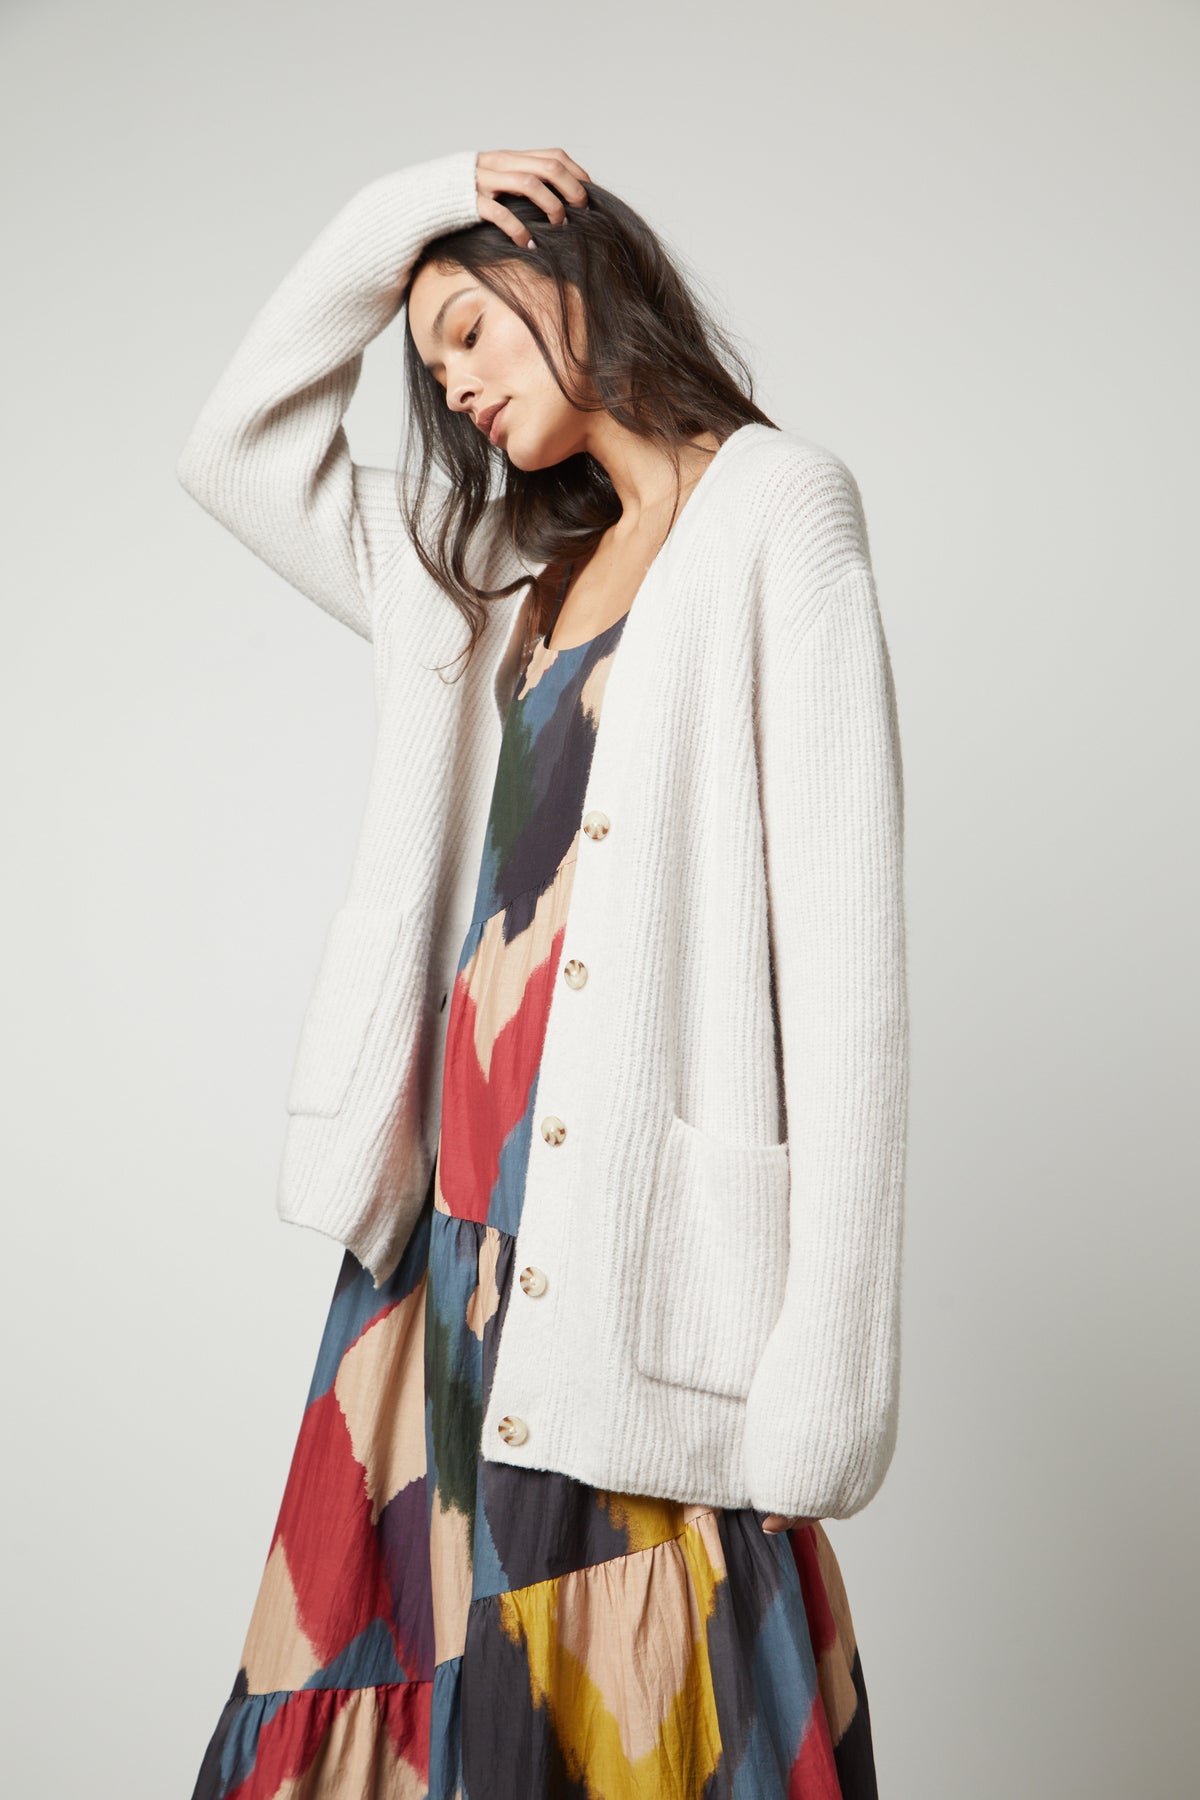   The model is wearing a white Velvet by Graham & Spencer BRITT OVERSIZED CARDIGAN and a multicolored dress. 